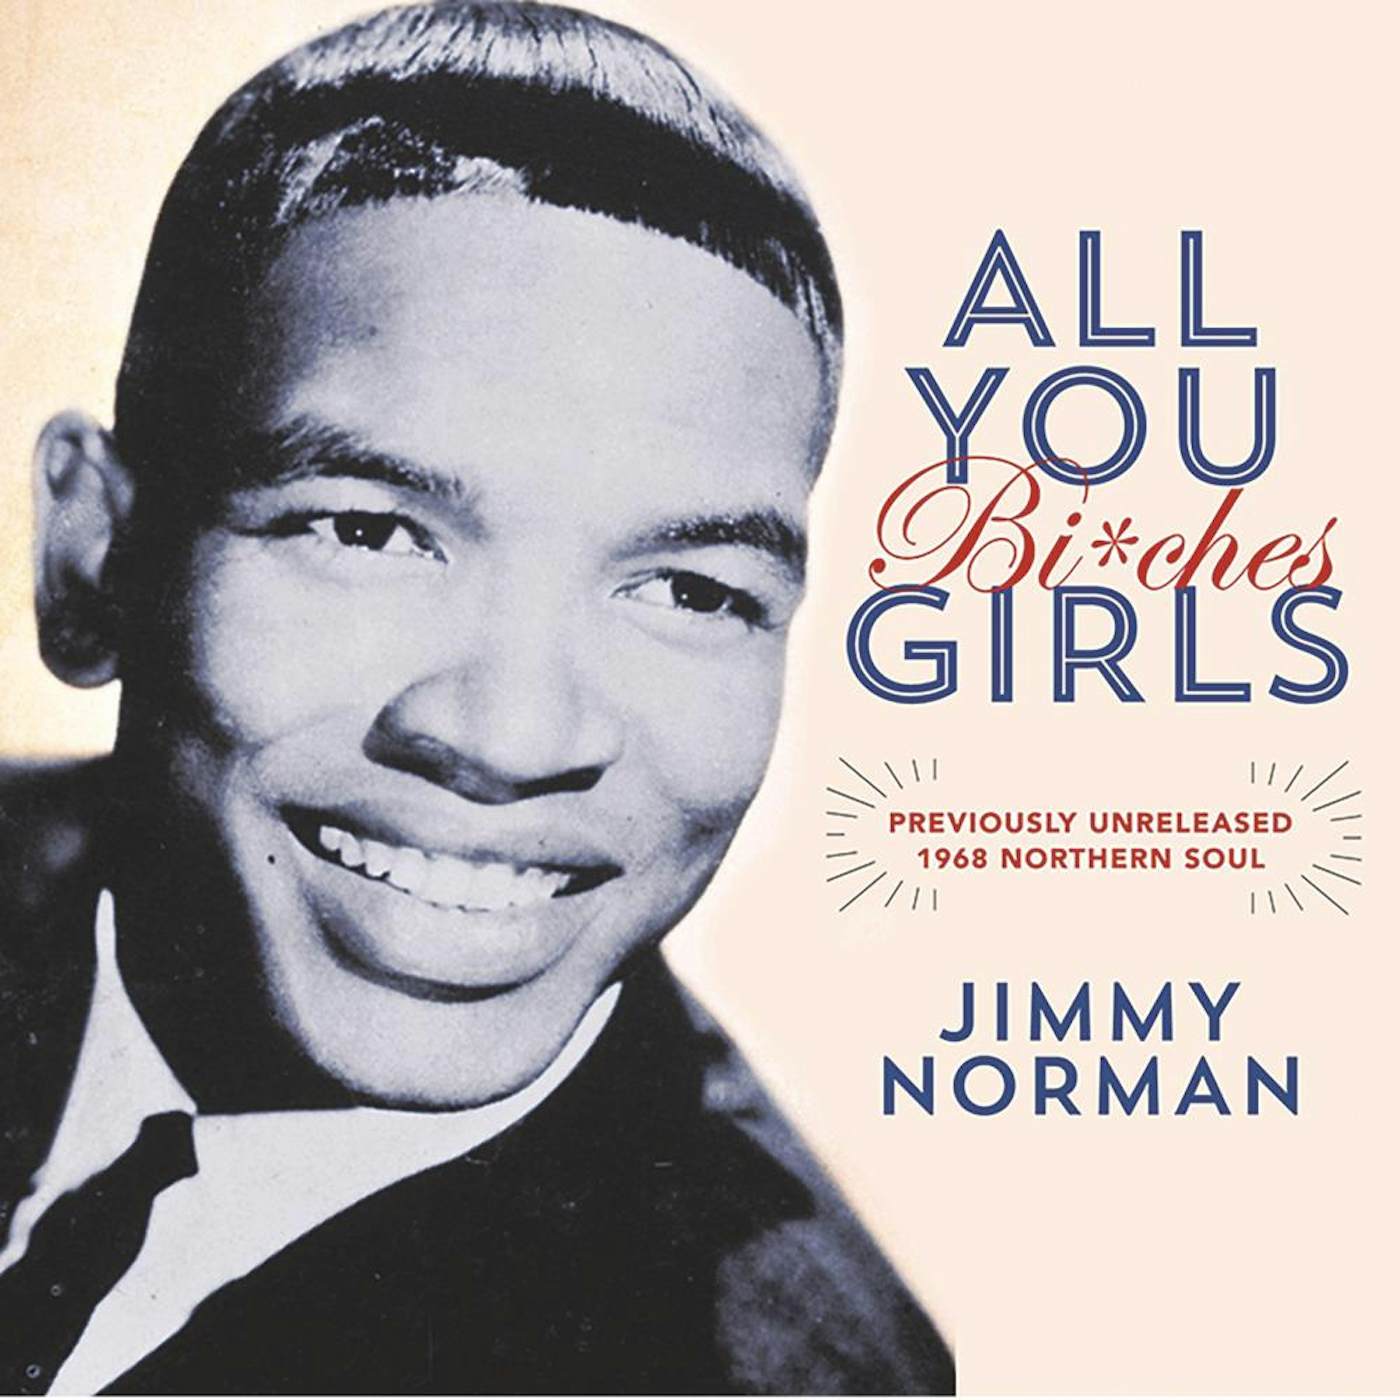 Jimmy Norman All You Girls (Bi*ches) / It's Beautiful When You're Falling In Love (7" Single) Vinyl Record